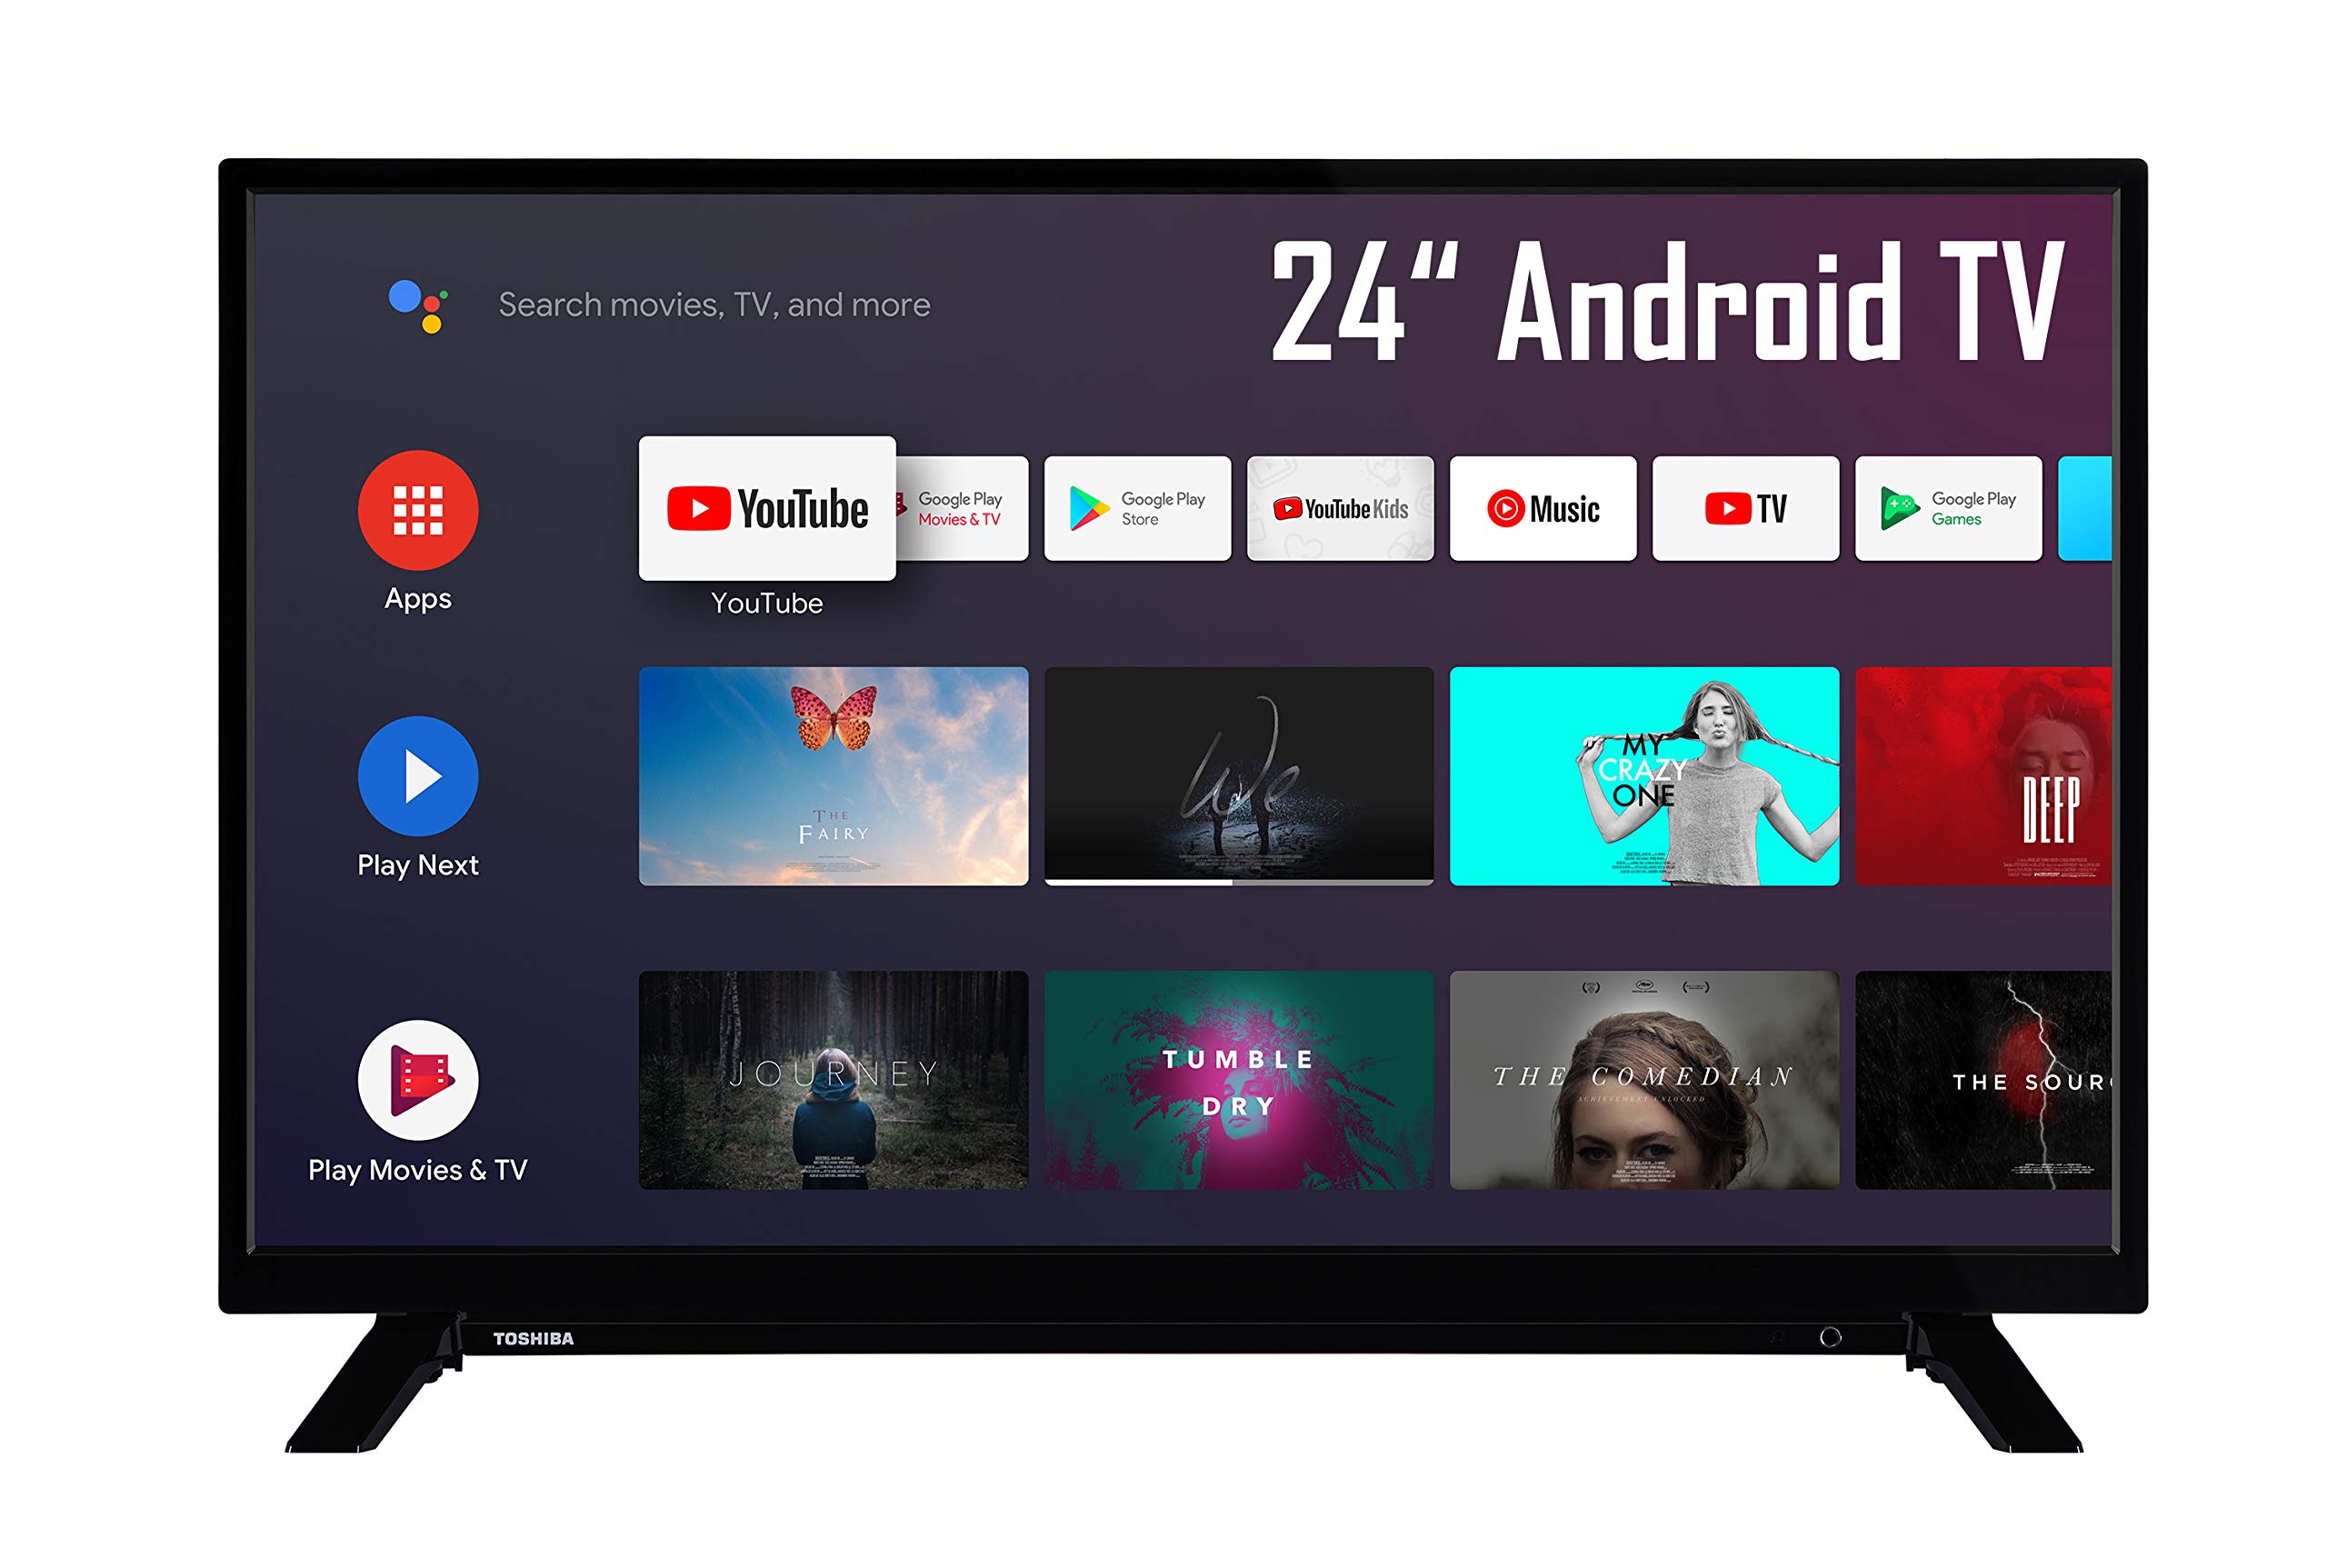 Toshiba 24WA2063DAX 24 Zoll Fernseher / Android TV (HD-ready, Smart TV, Play Store & Google Assistant, Triple-Tuner, Bluetooth)